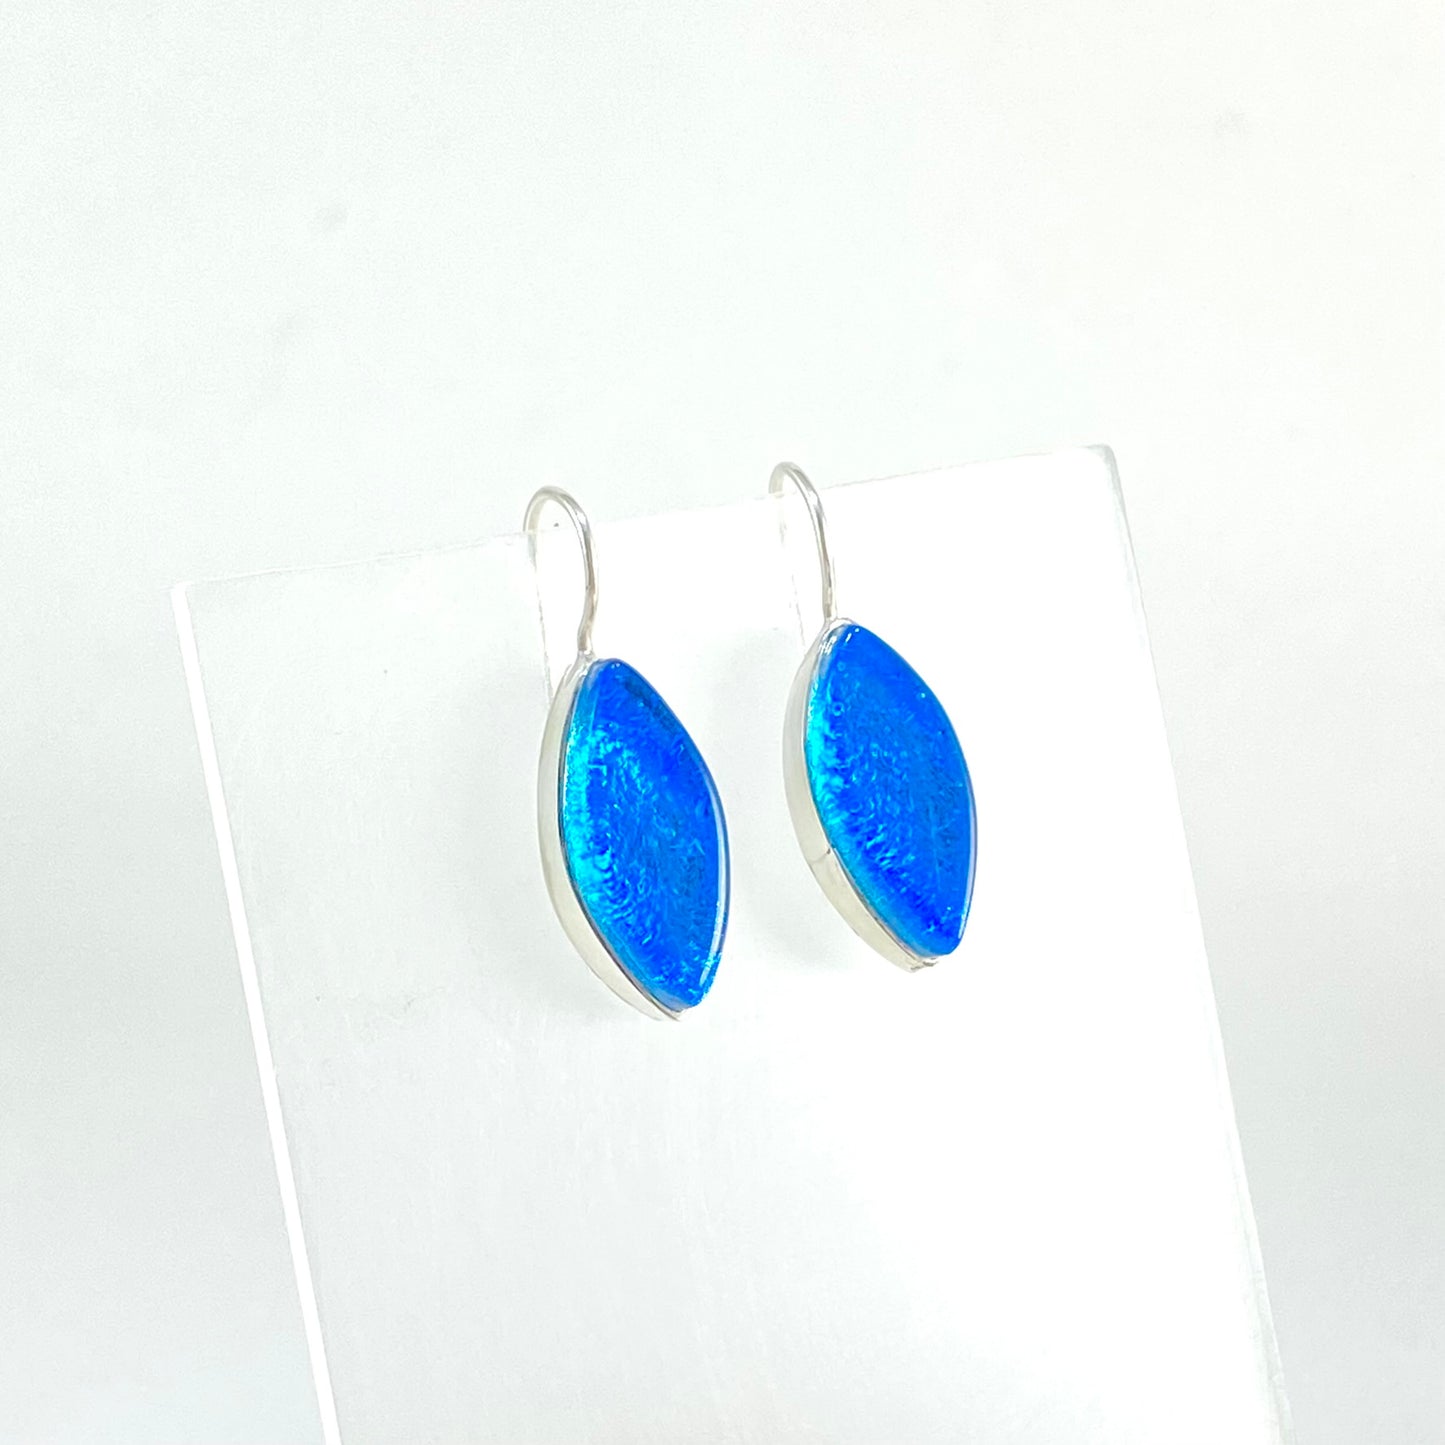 Marquise Earrings in Turquoise